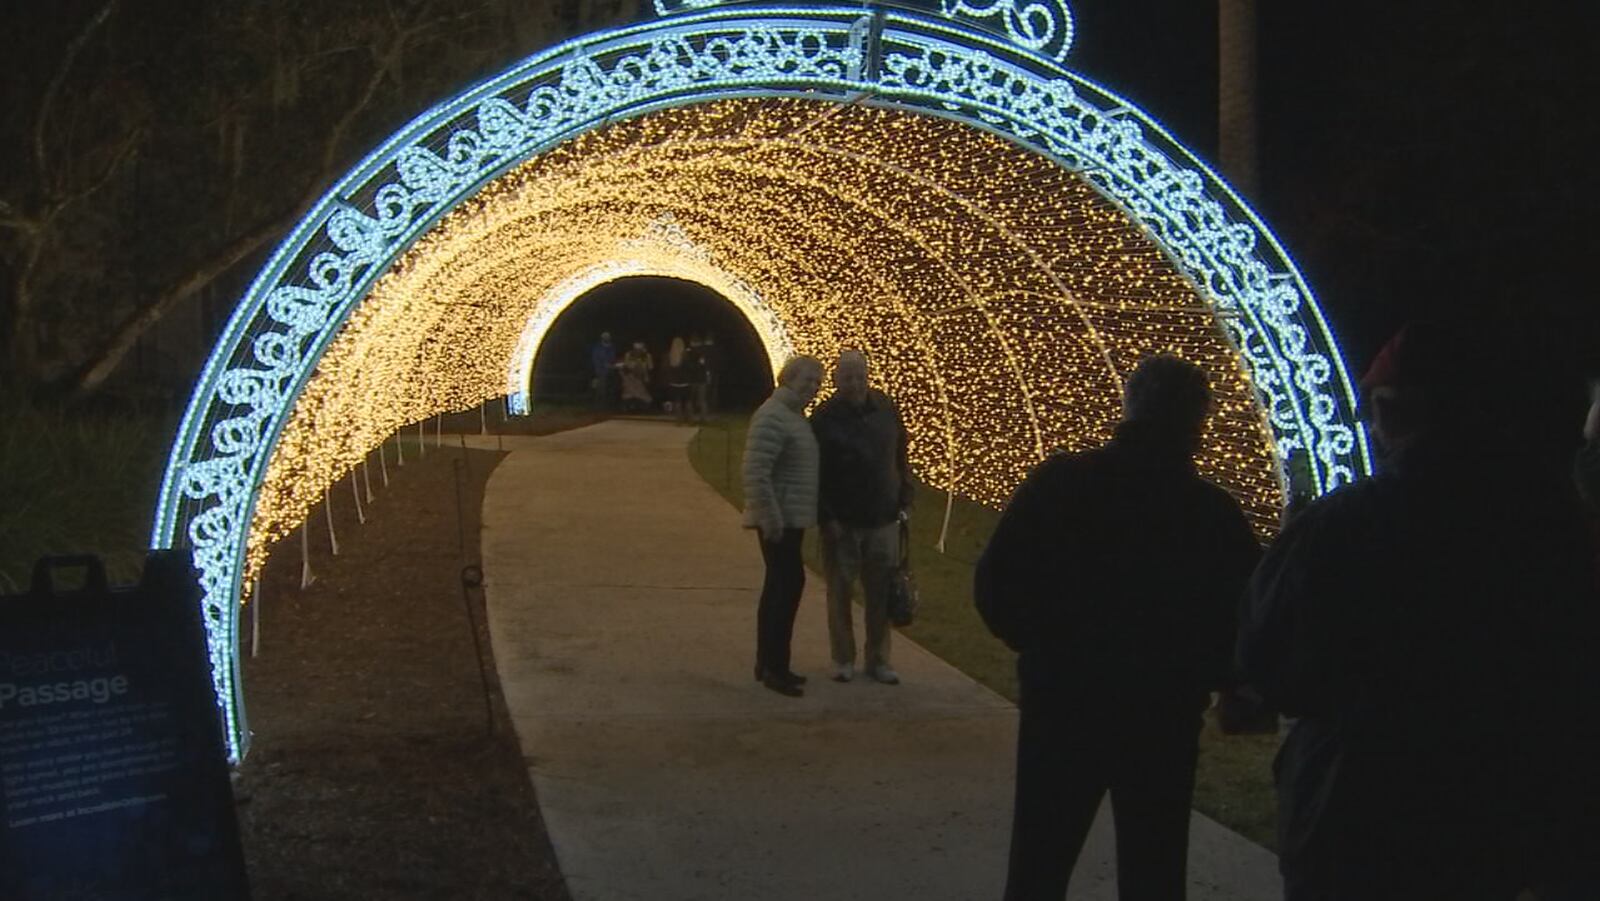 PHOTOS “Dazzling Nights” returns to Leu Gardens for a 2nd year WFTV